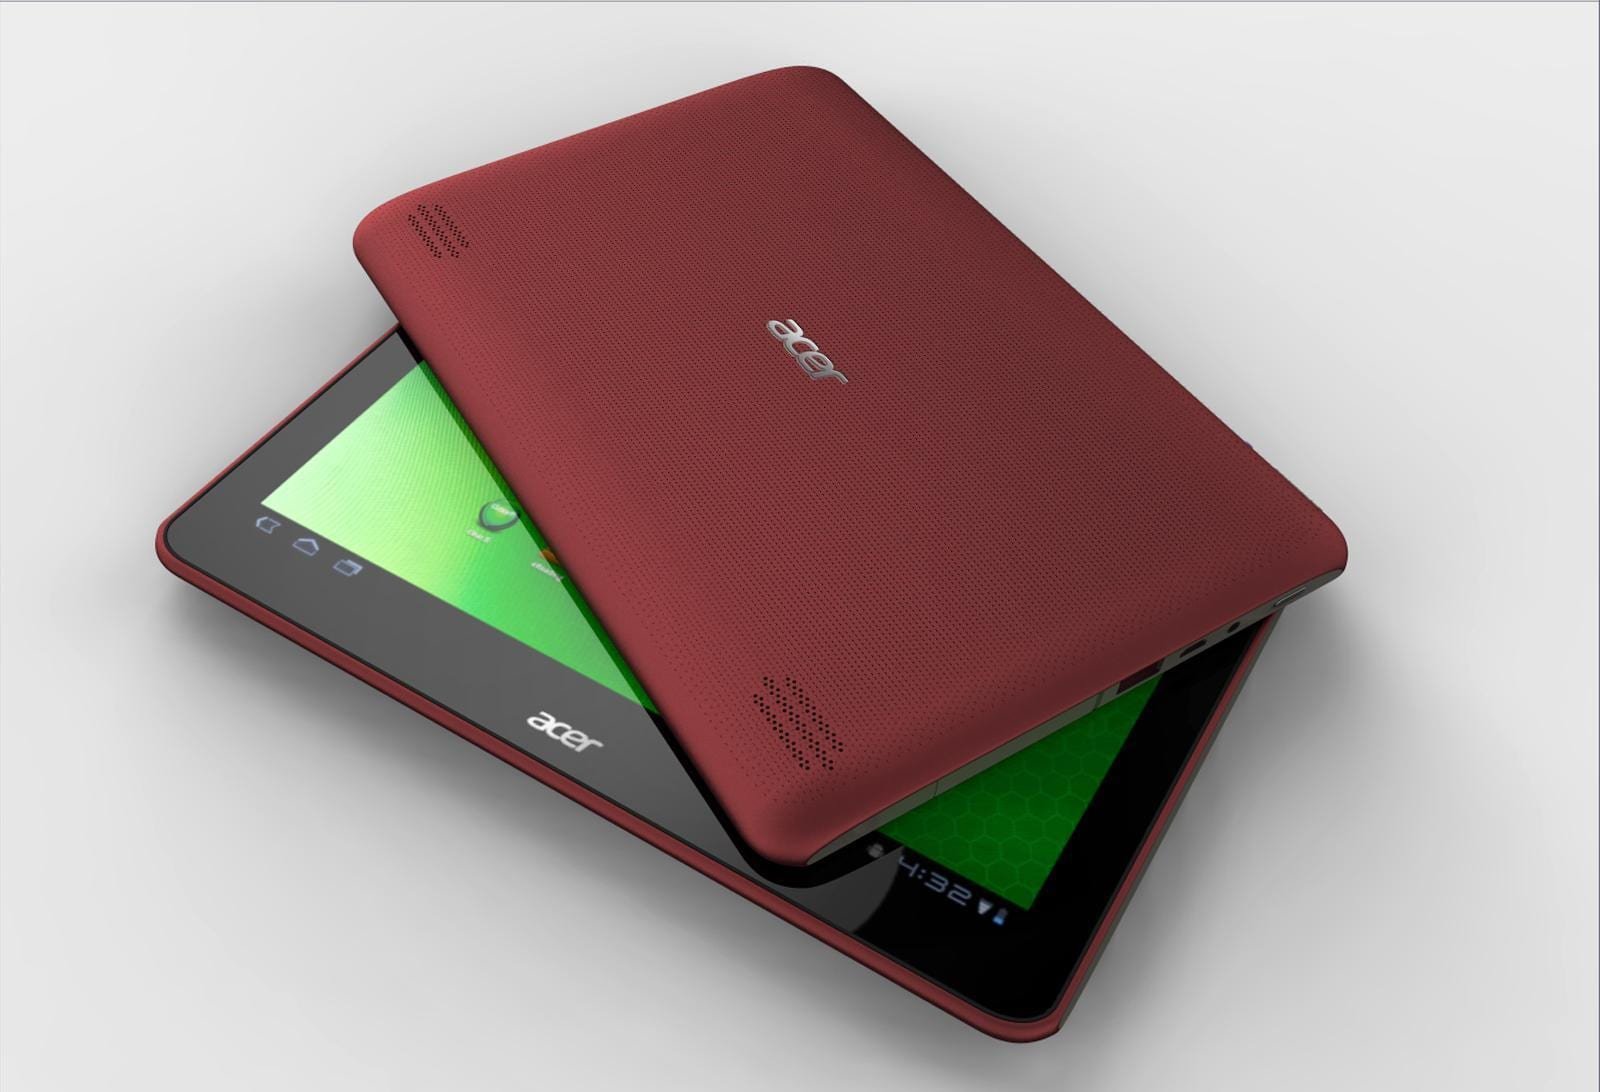 Acer Iconia Tab A200 : la tablette Android Iconia Tab A200 officielle !